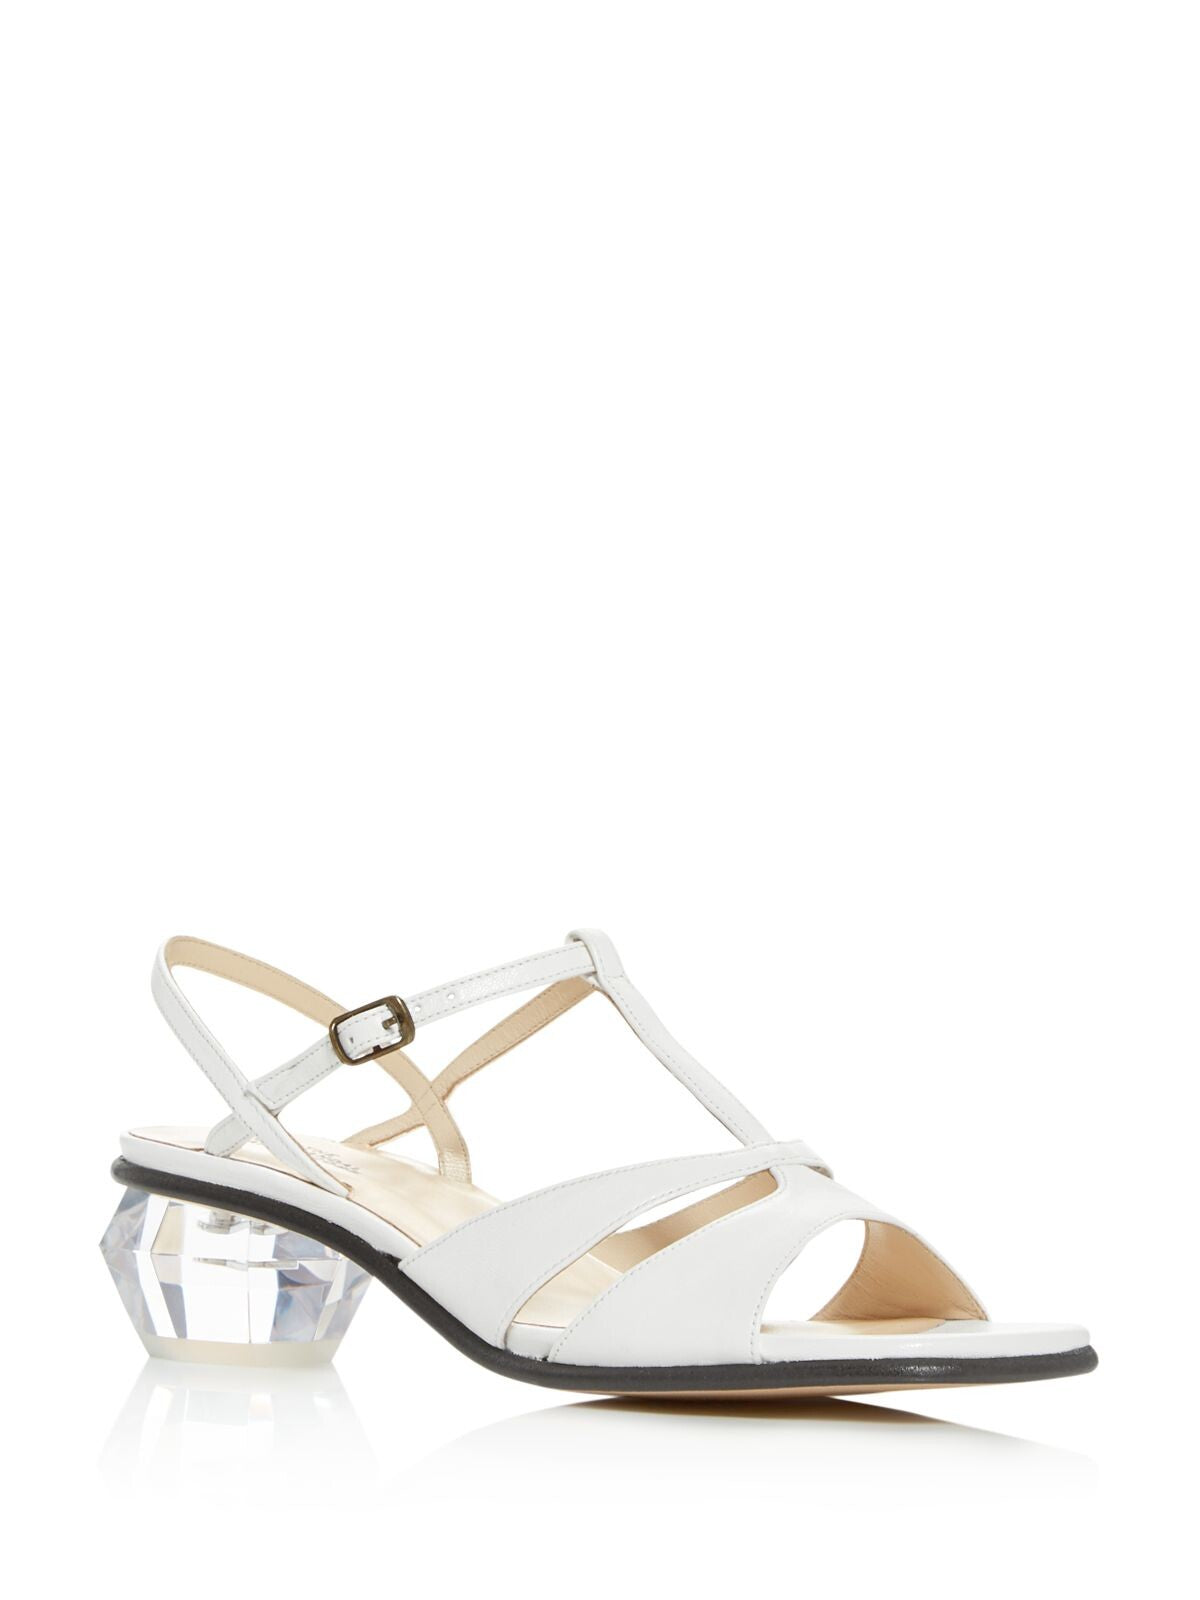 MARC JACOBS Womens White Adjustable Padded T-Strap Strappy The Gem Square Toe Sculpted Heel Buckle Leather Dress Slingback Sandal 38.5